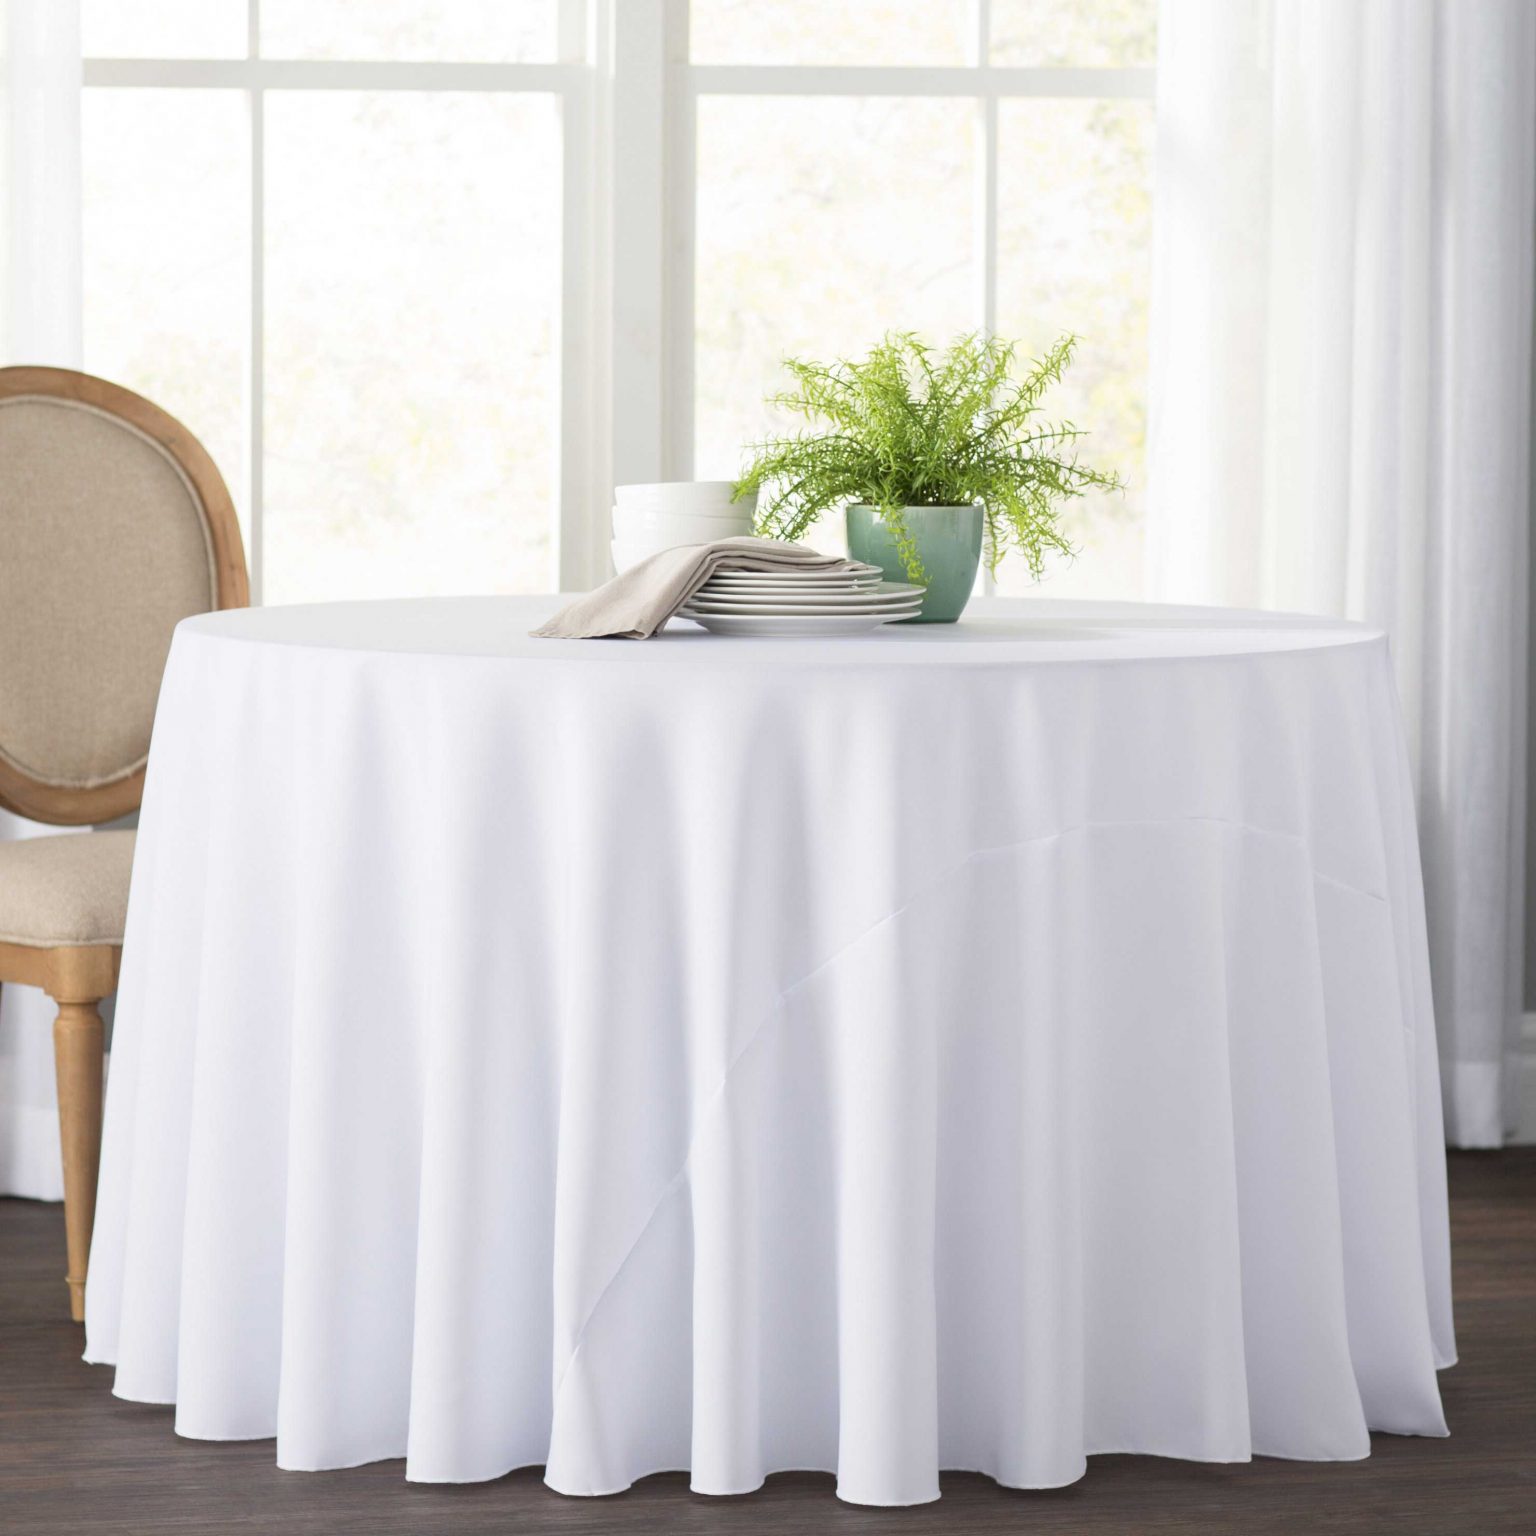 60 Inch Round Tablecloth Linen What Size Tablecloth For 60 Inch Round Table 1536x1536 